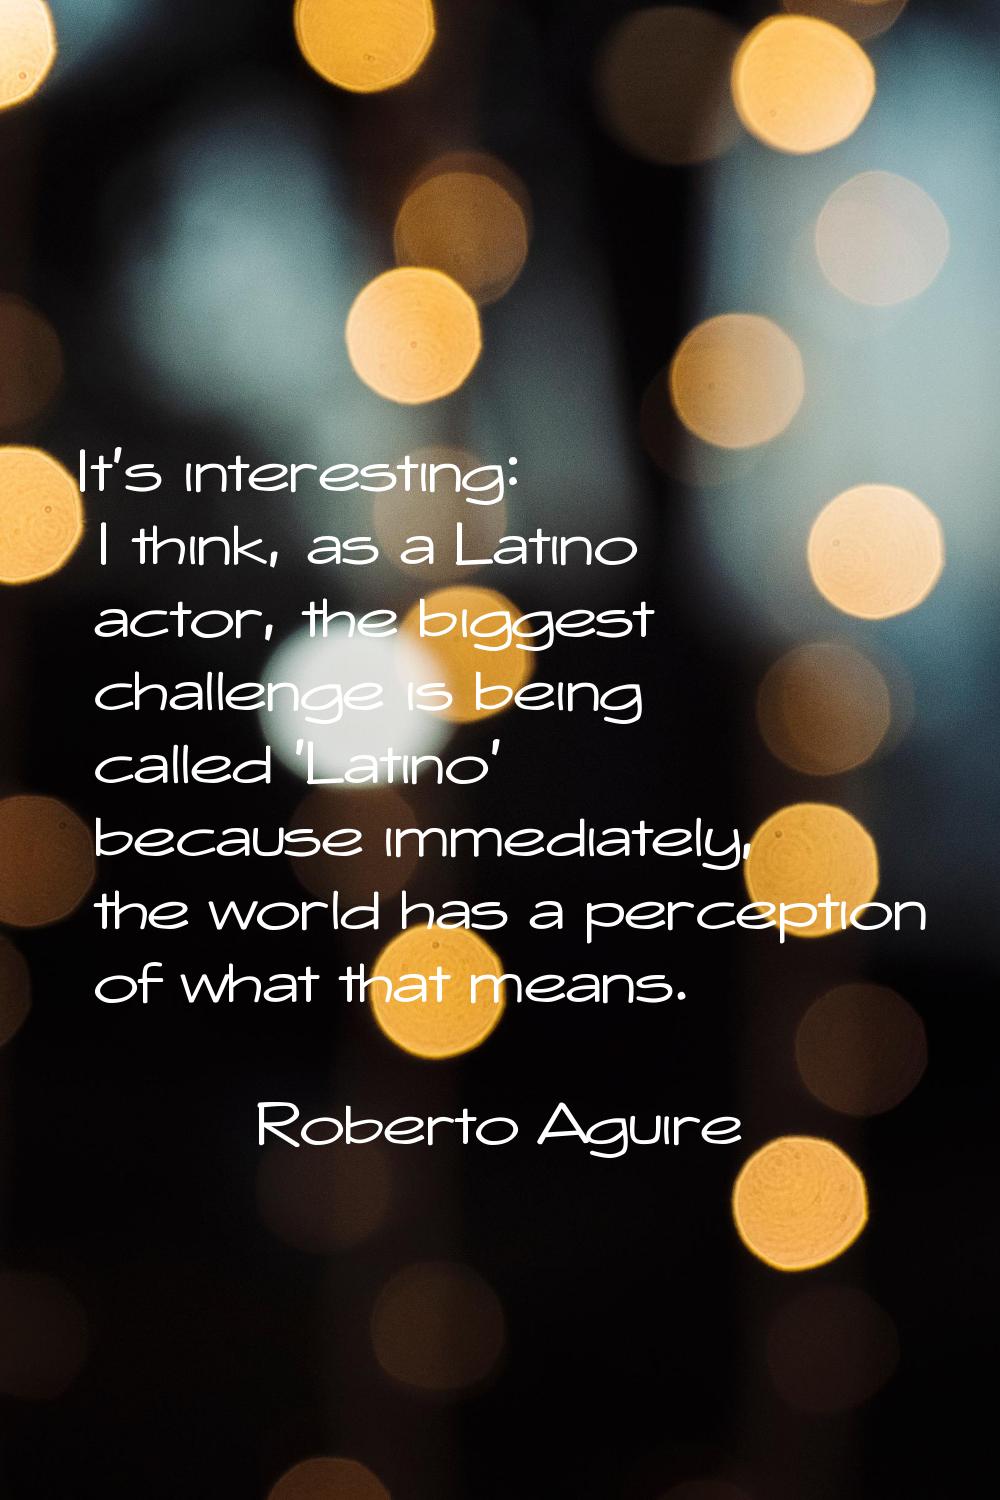 It's interesting: I think, as a Latino actor, the biggest challenge is being called 'Latino' becaus